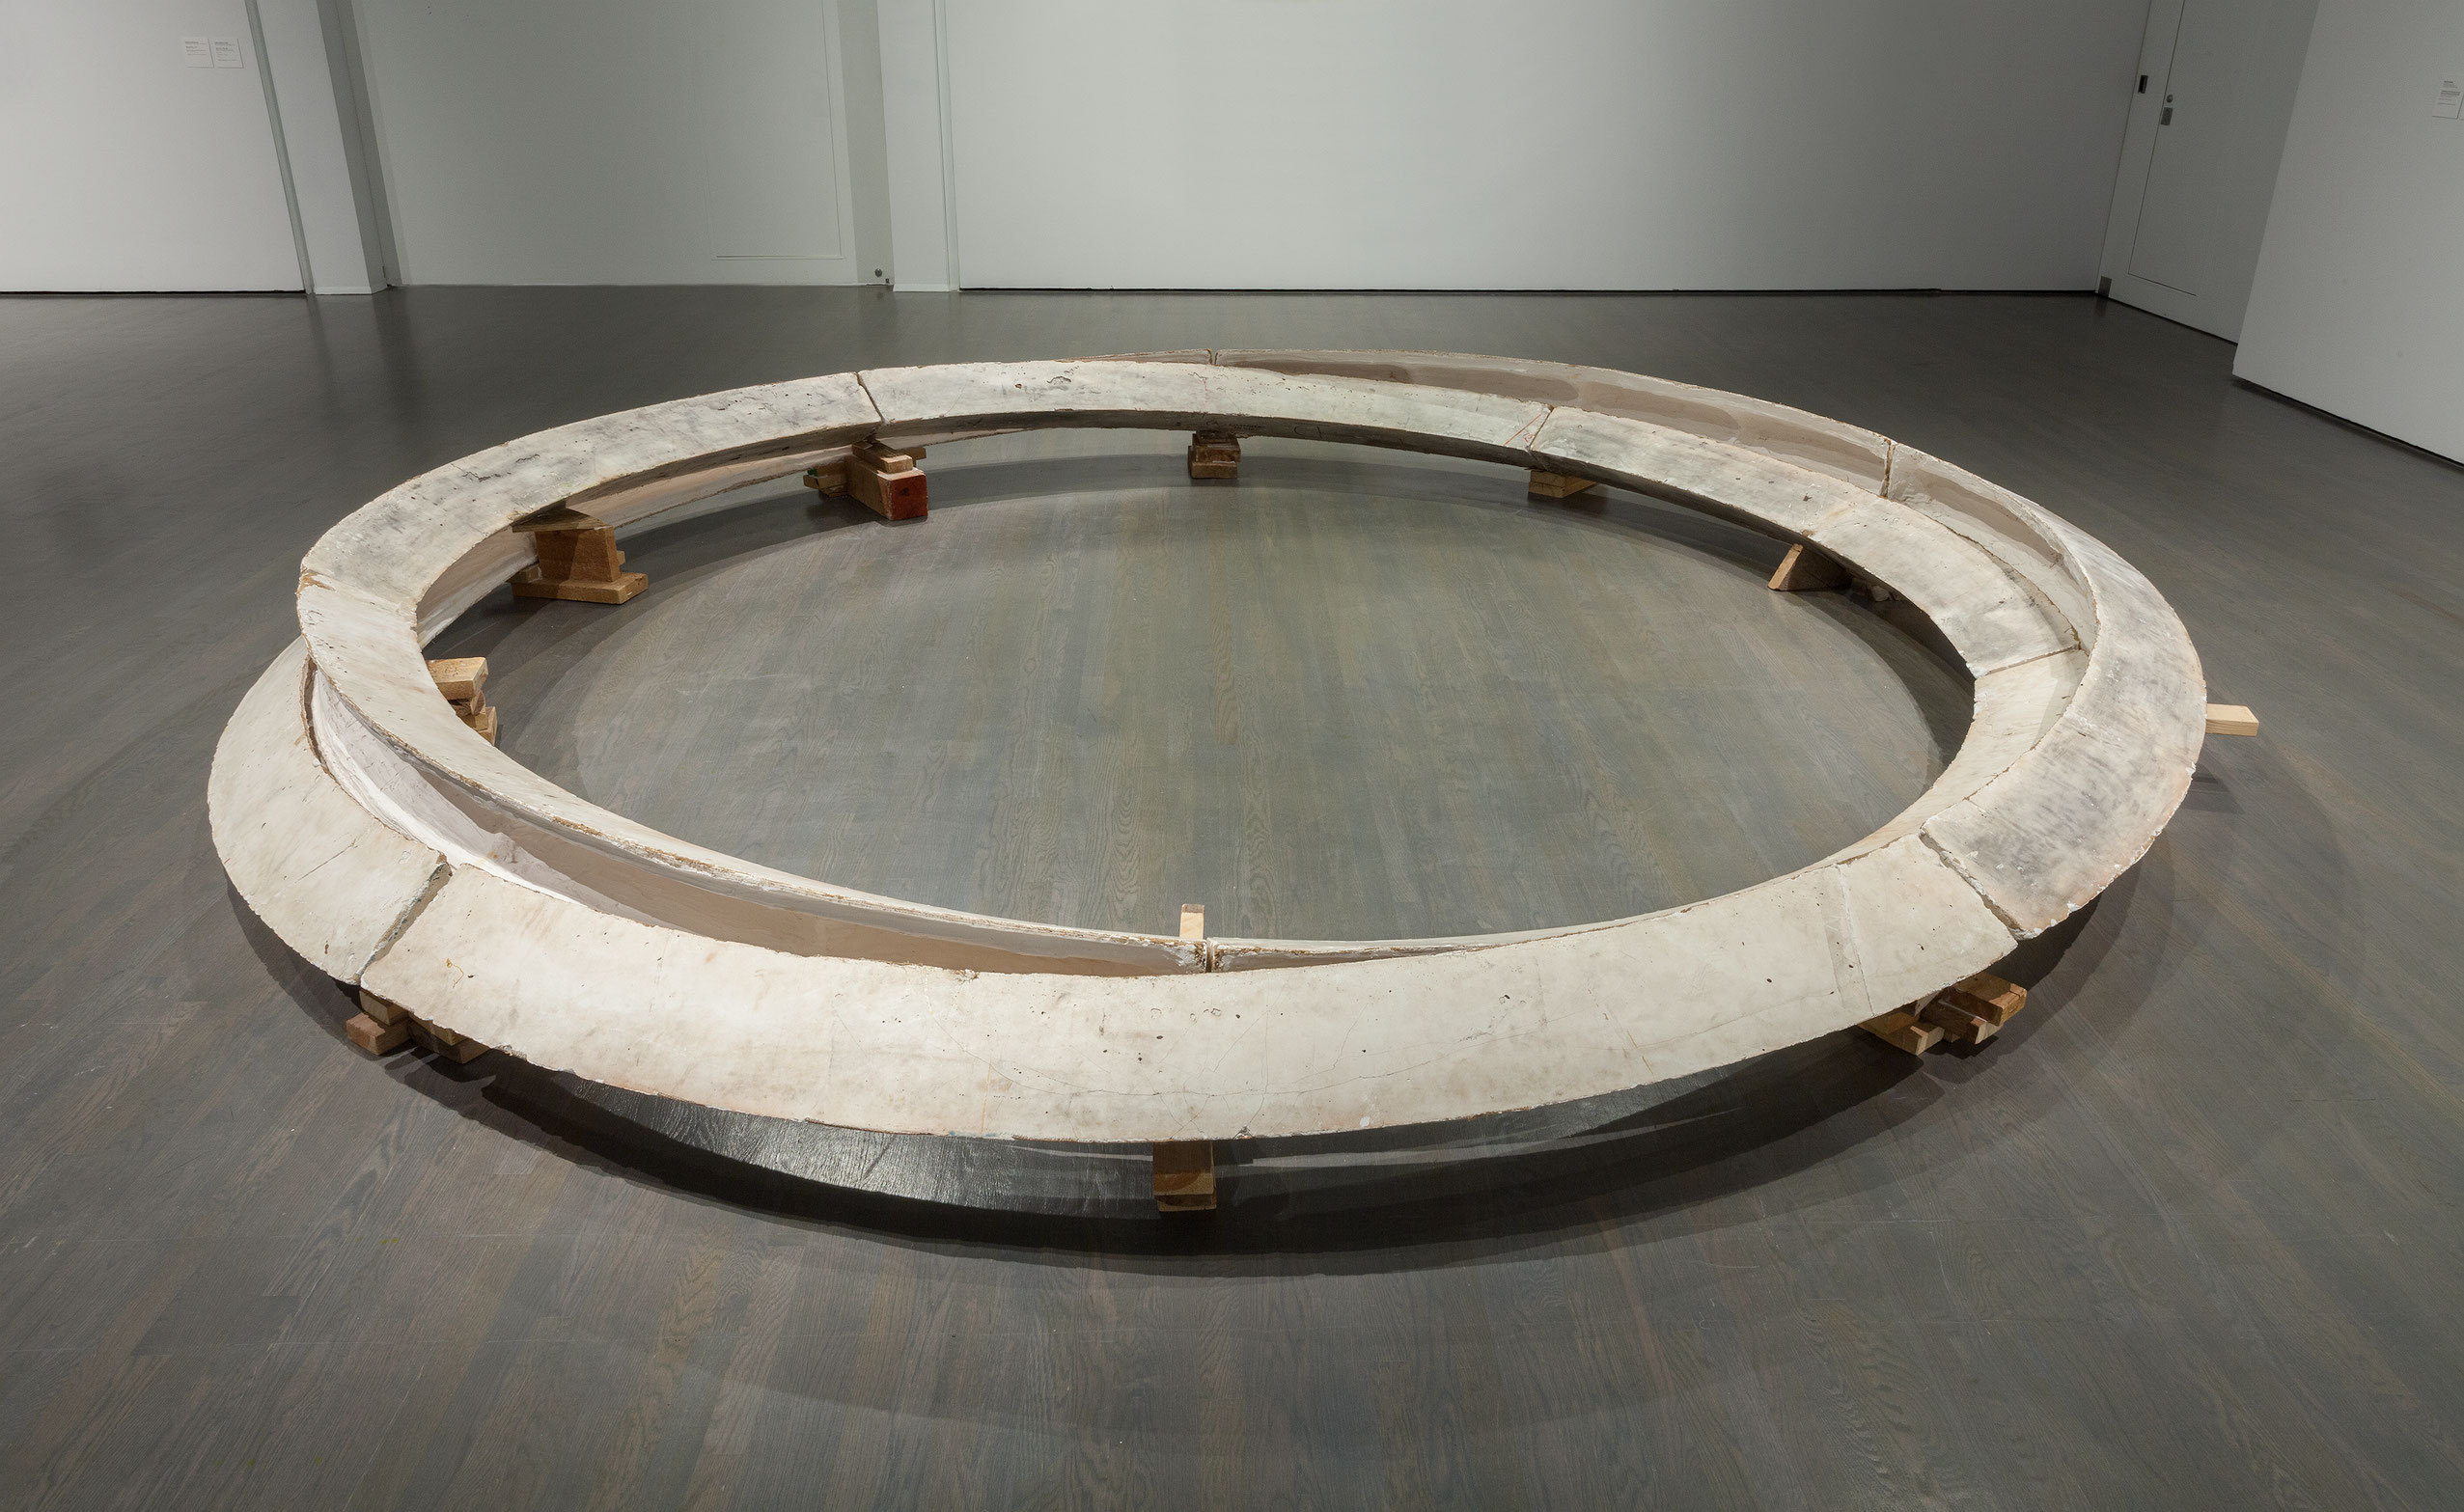 Smoke Rings: Two Concentric Tunnels, Skewed and Noncommunicating, 1980, Bruce Nauman, Plâtre et bois.